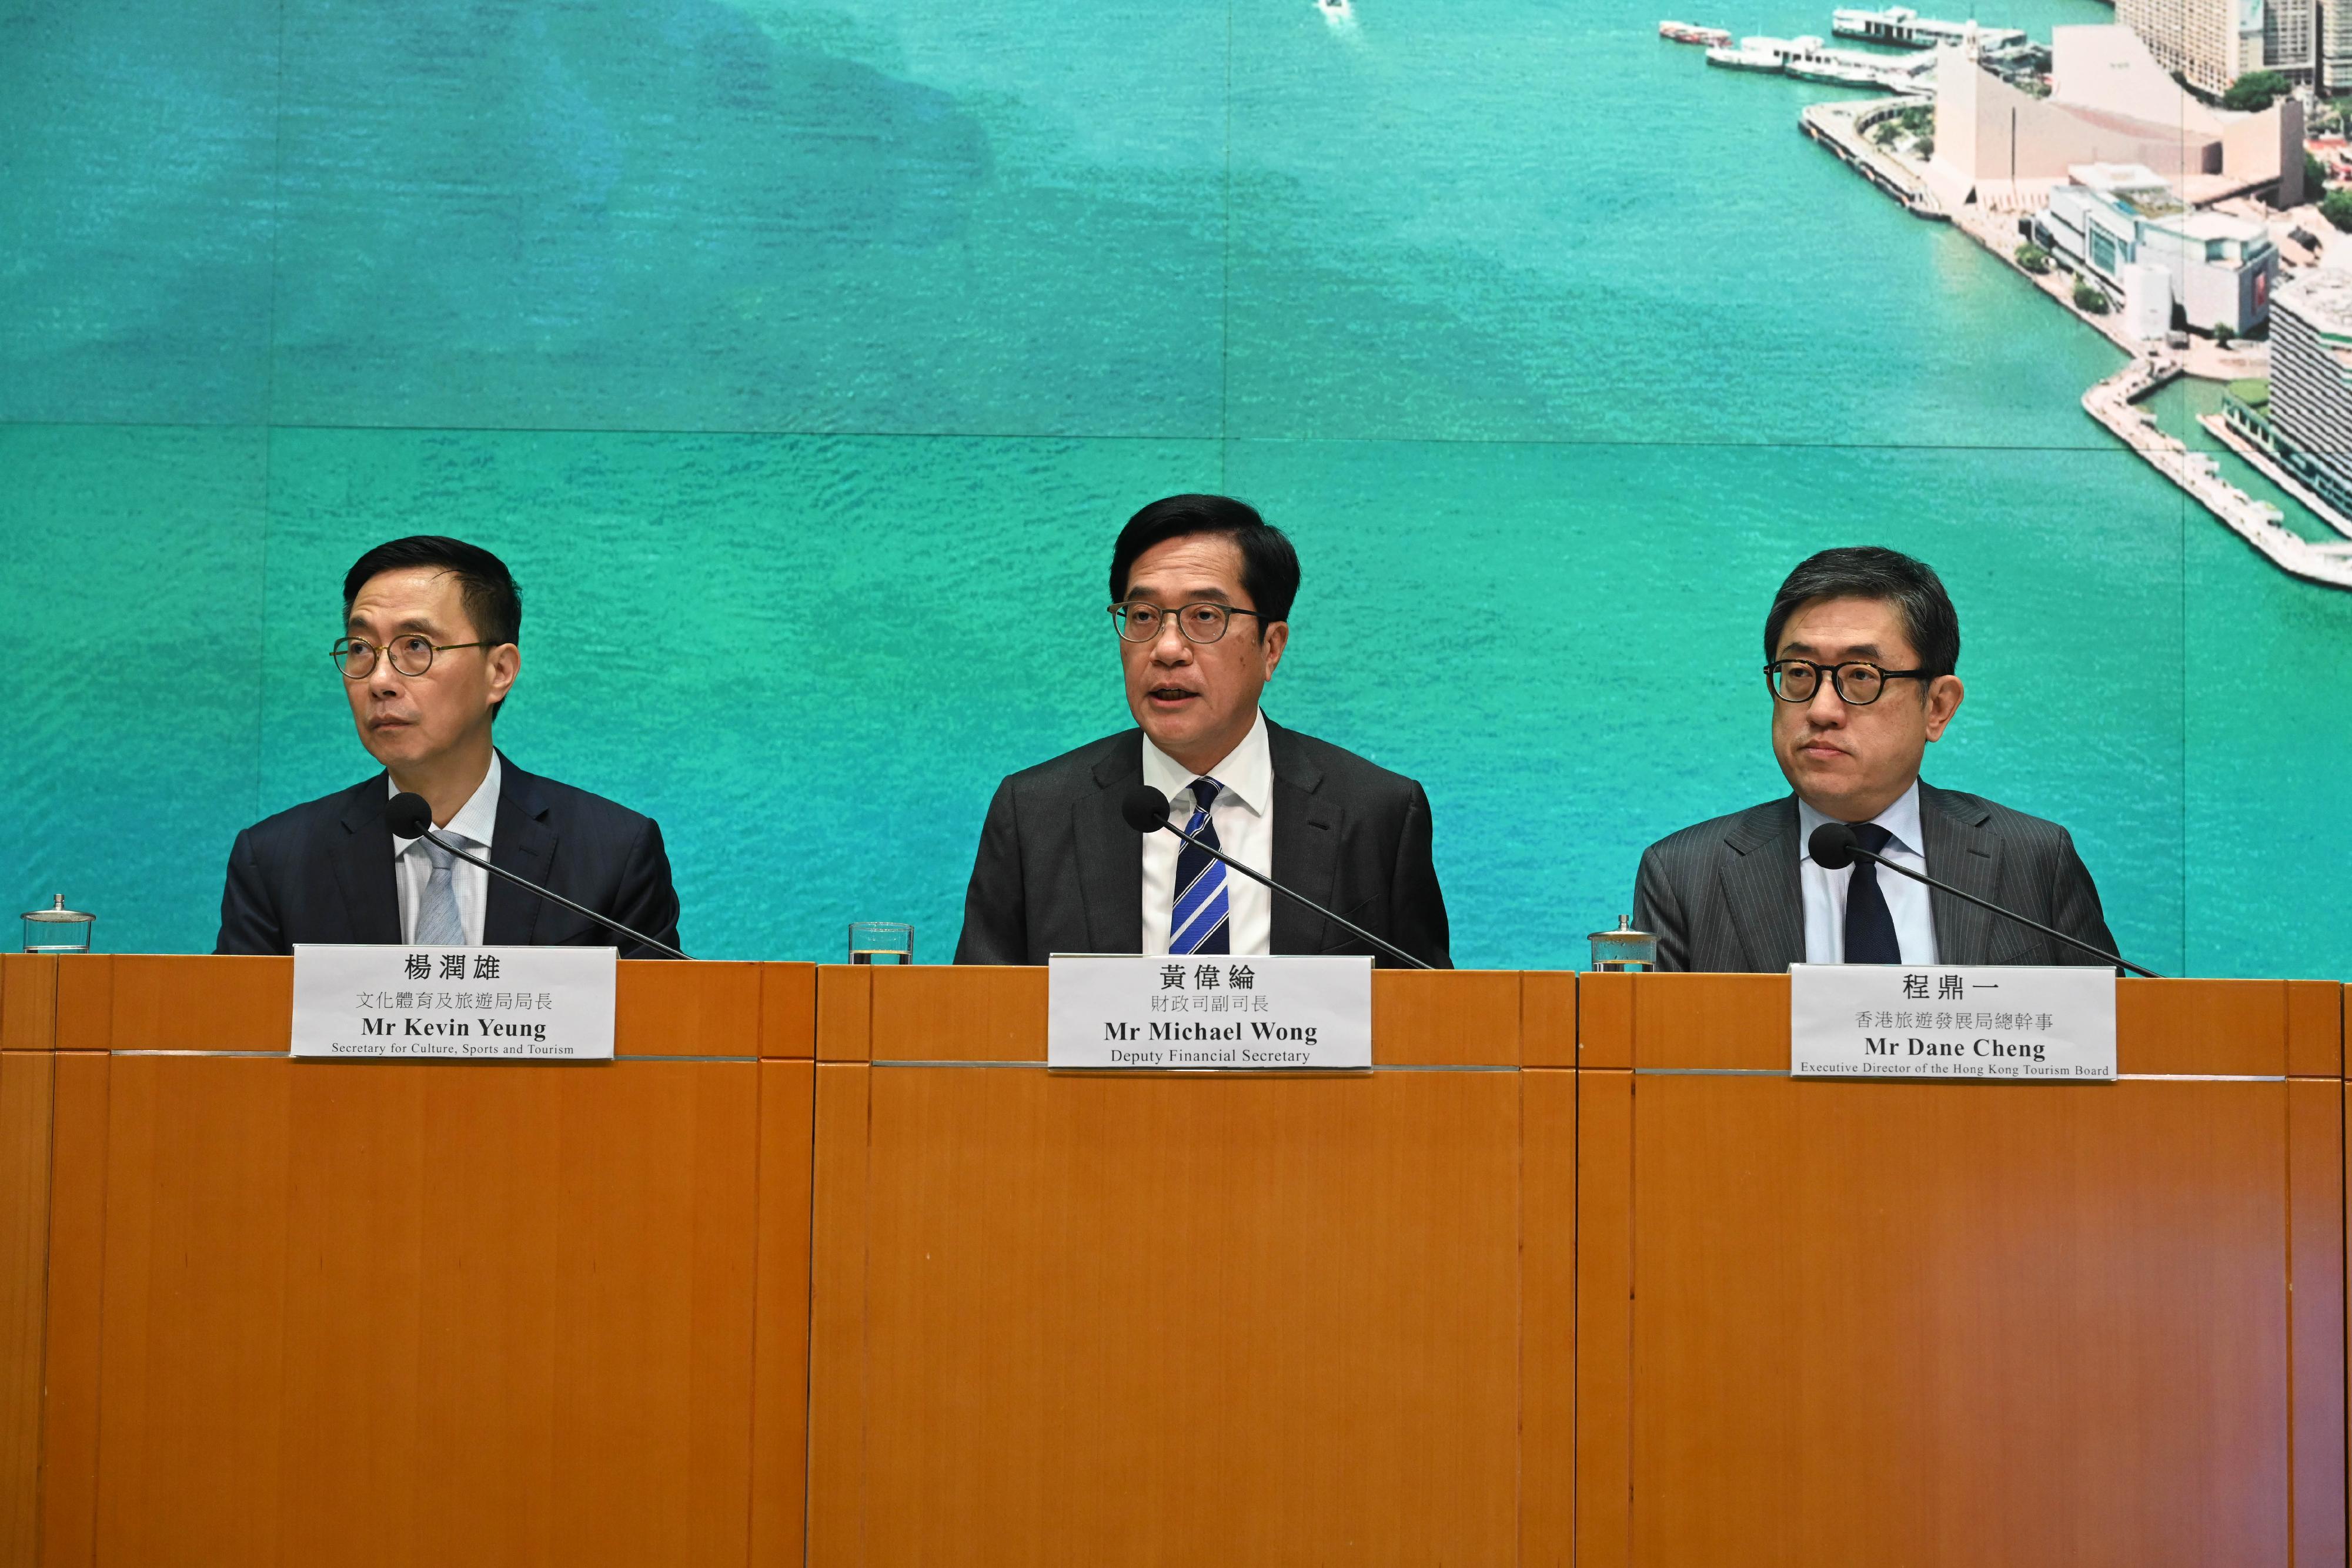 The Deputy Financial Secretary, Mr Michael Wong (centre), is joined by the Secretary for Culture, Sports and Tourism, Mr Kevin Yeung (left), and the Executive Director of the Hong Kong Tourism Board, Mr Dane Cheng (right), at a press conference today (May 21) to announce the calendar of mega events in Hong Kong (second half of 2024).
